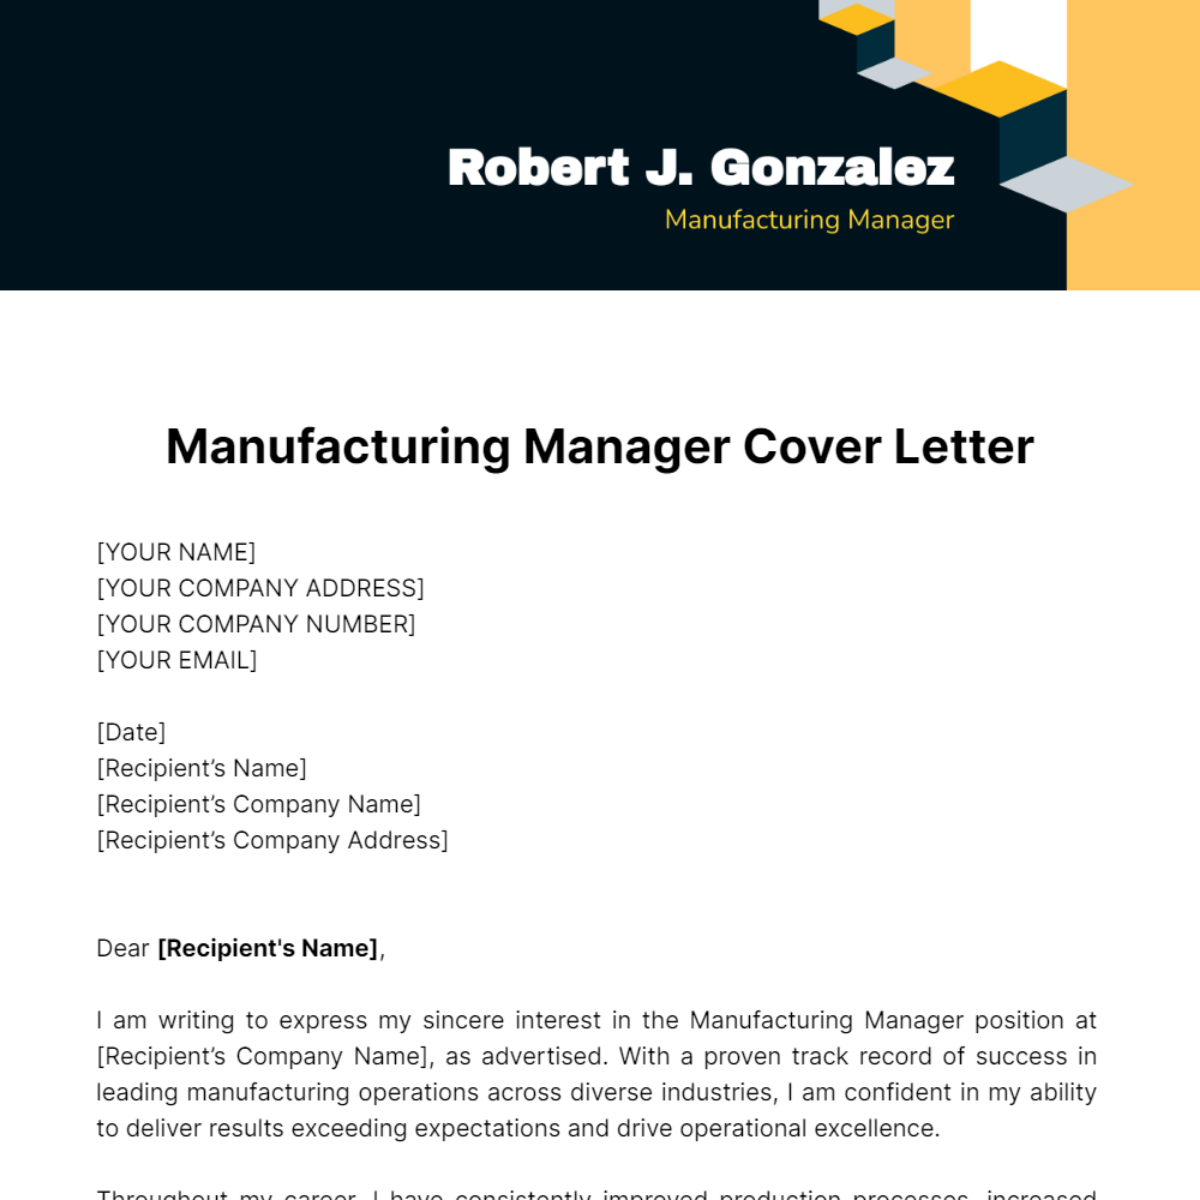 Manufacturing Manager Cover Letter Template